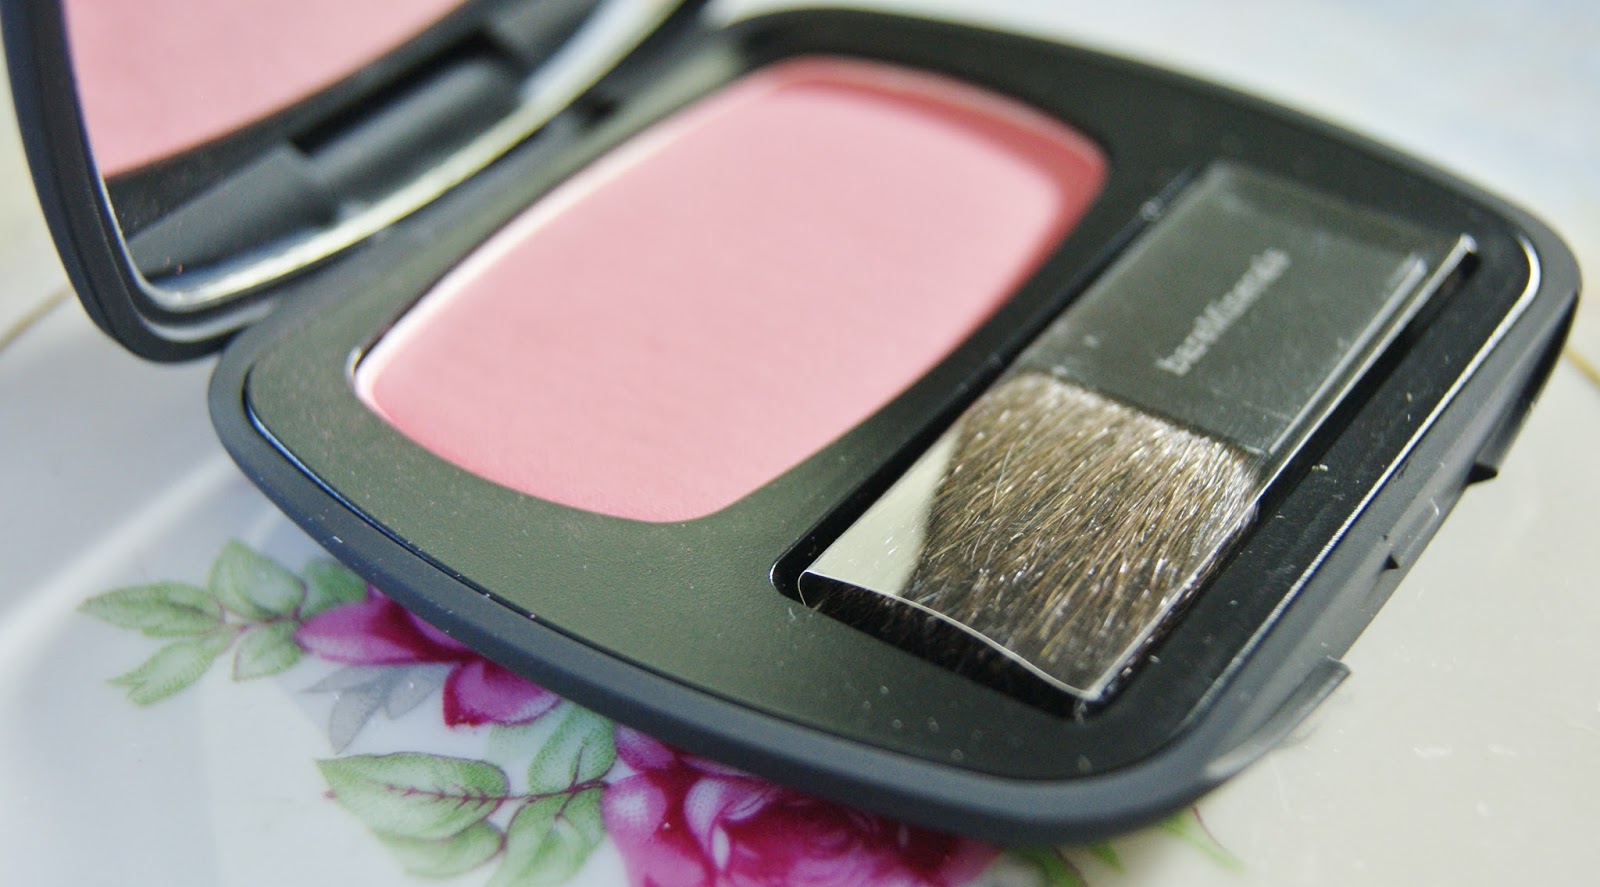 Bare Minerals READY Blush The Faux Pas